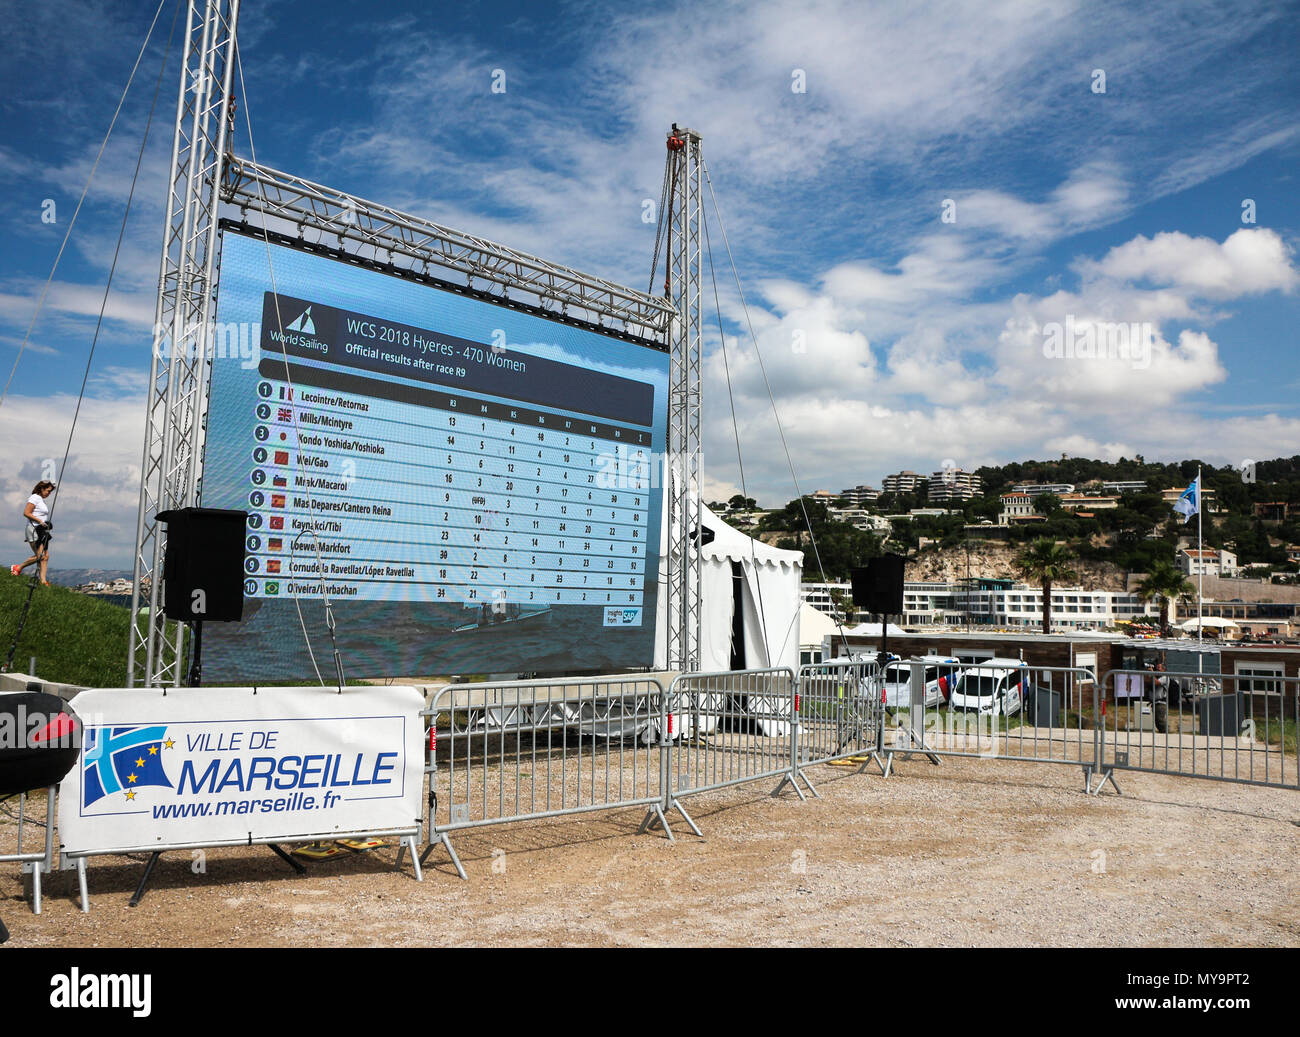 World Cup Final In Marseilles 2024 Olympic Site MY9PT2 